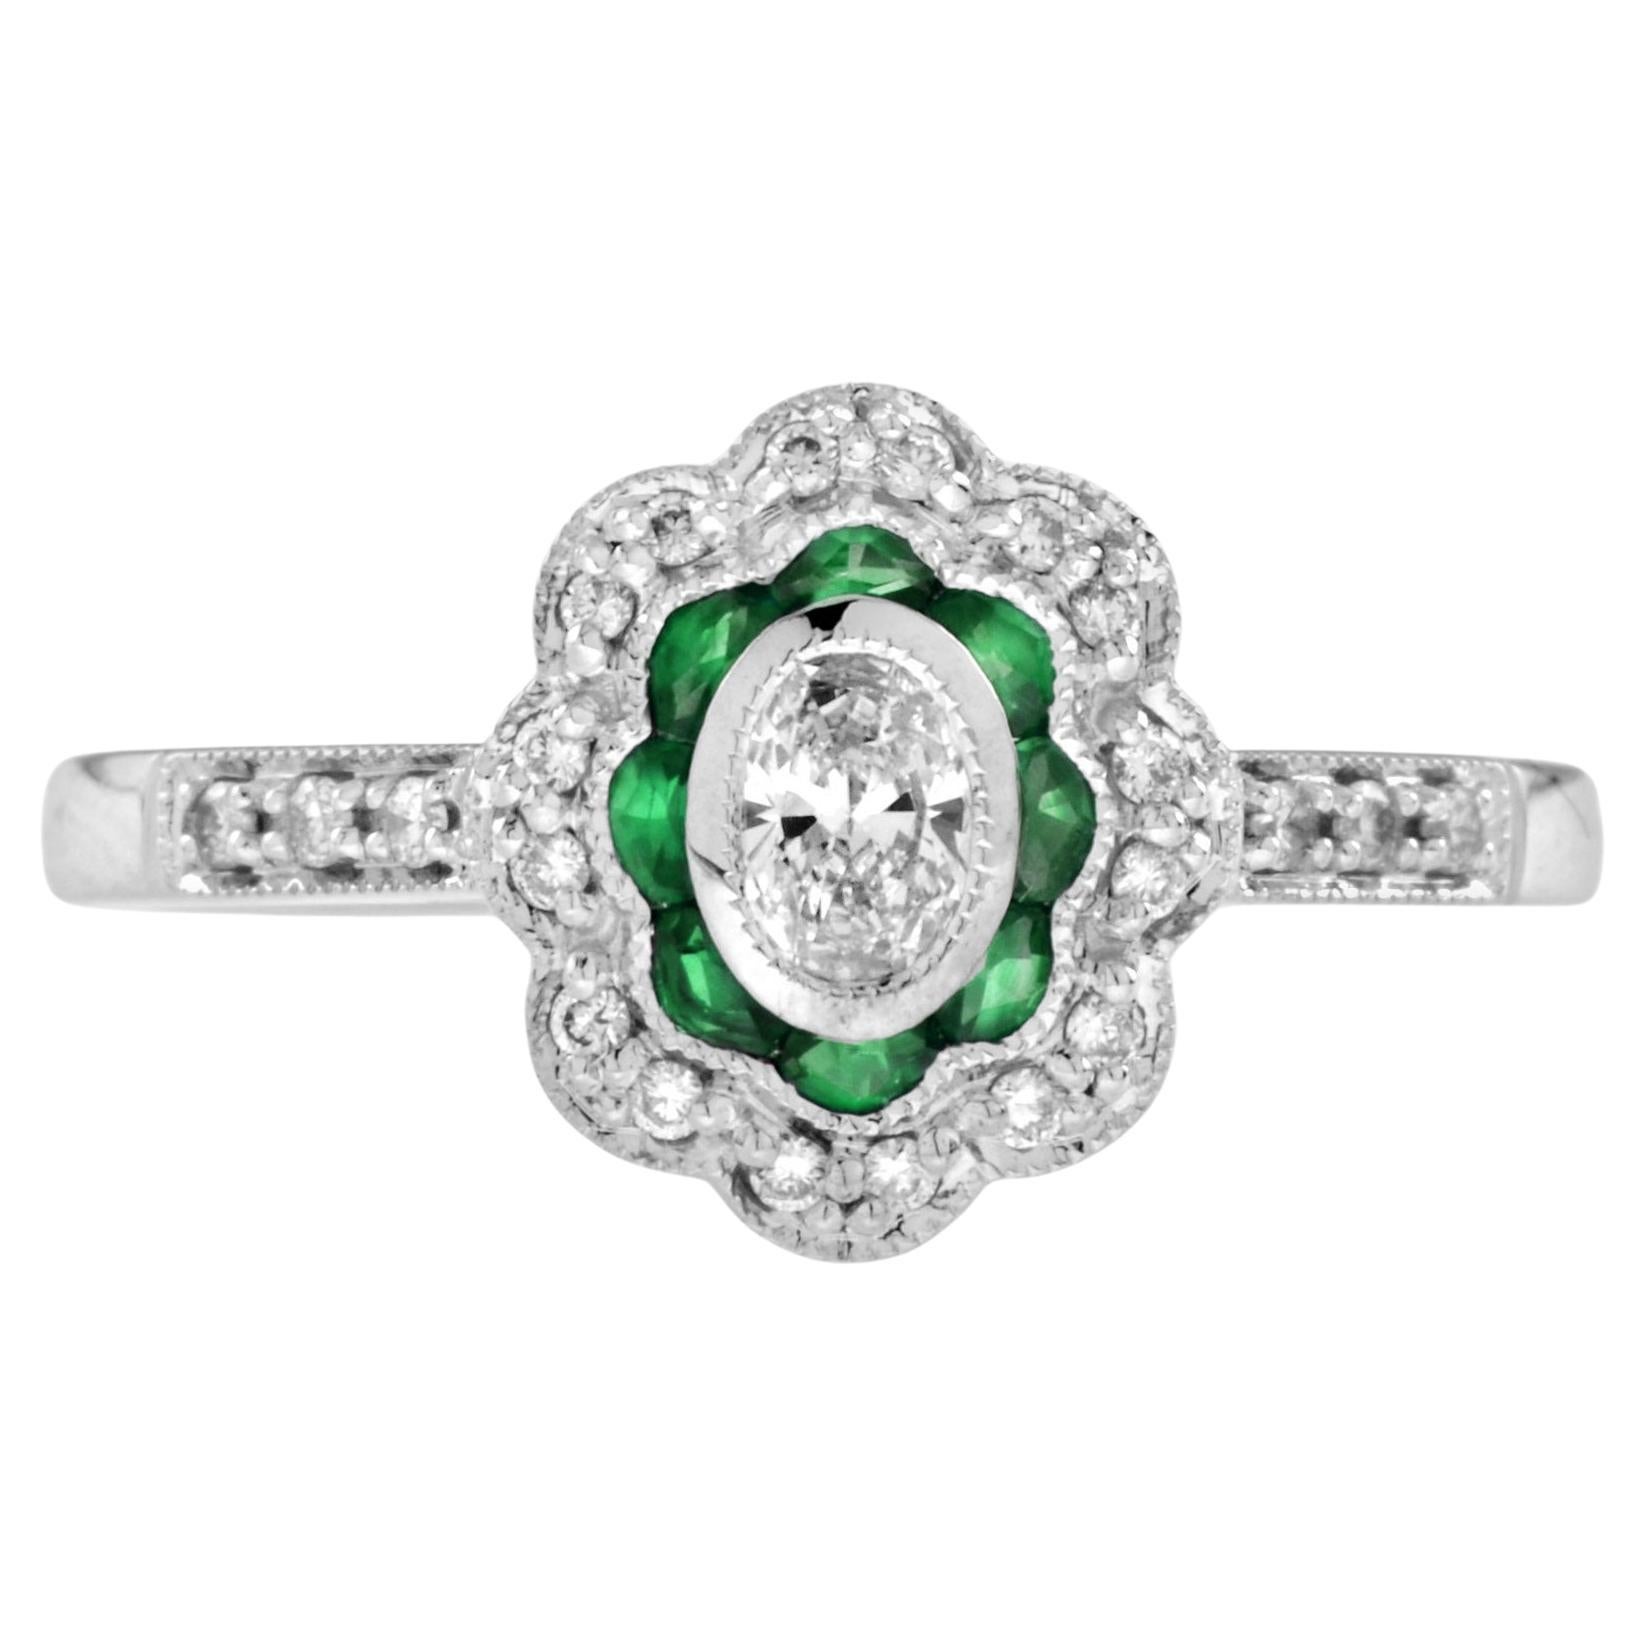 0.15 Ct. Diamond and Emerald Art Deco Style Engagement Ring in 18K White Gold